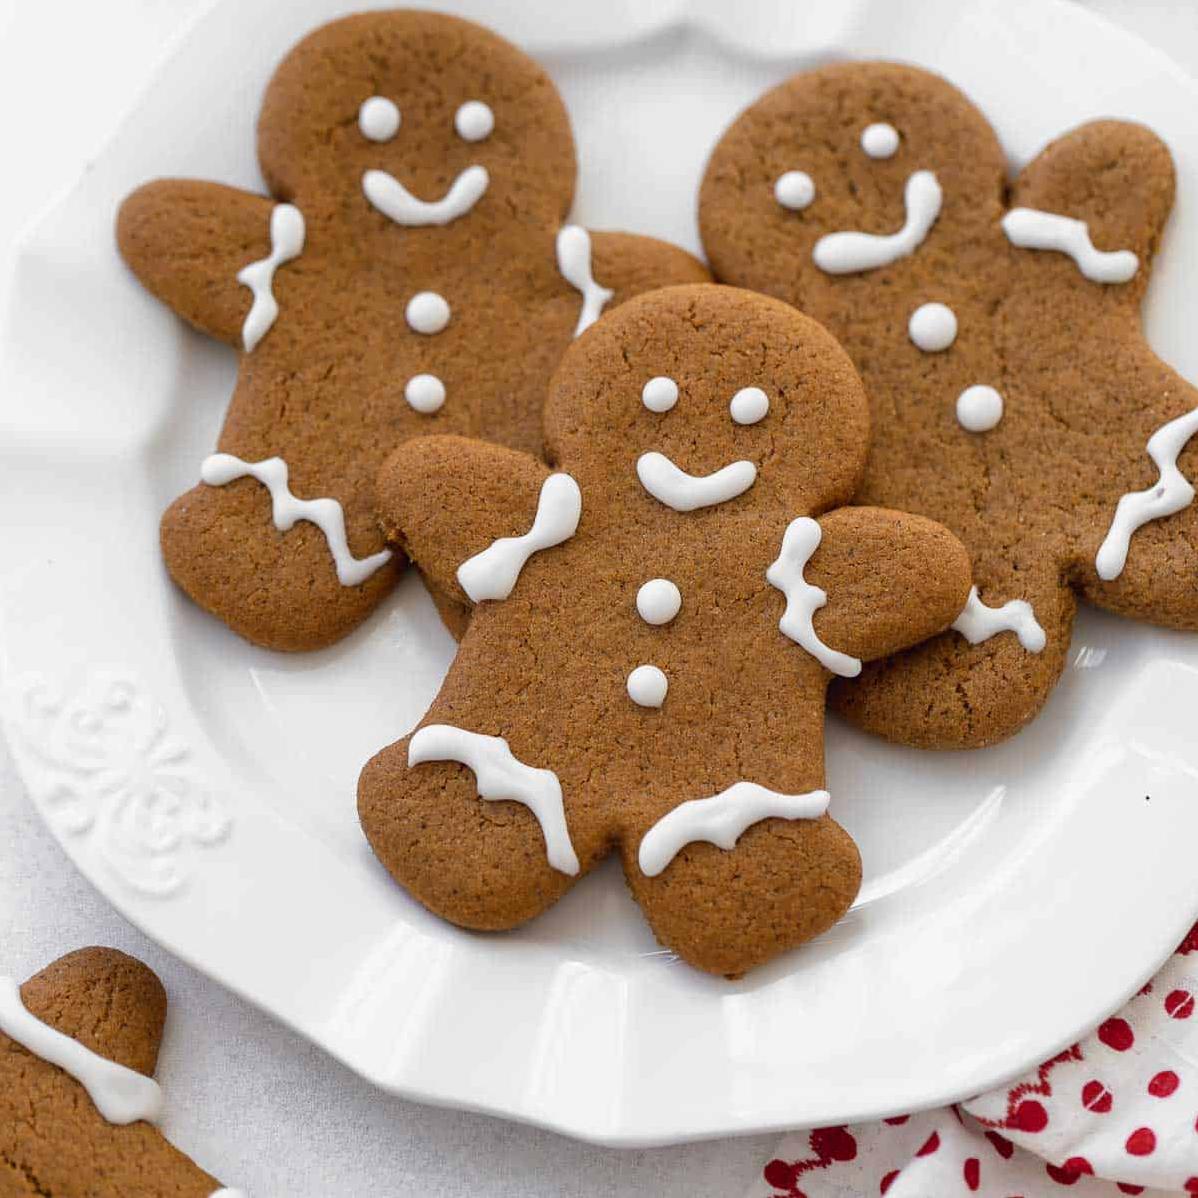  Soft and chewy, these gluten-free gingerbread cookies are perfect for the holiday season